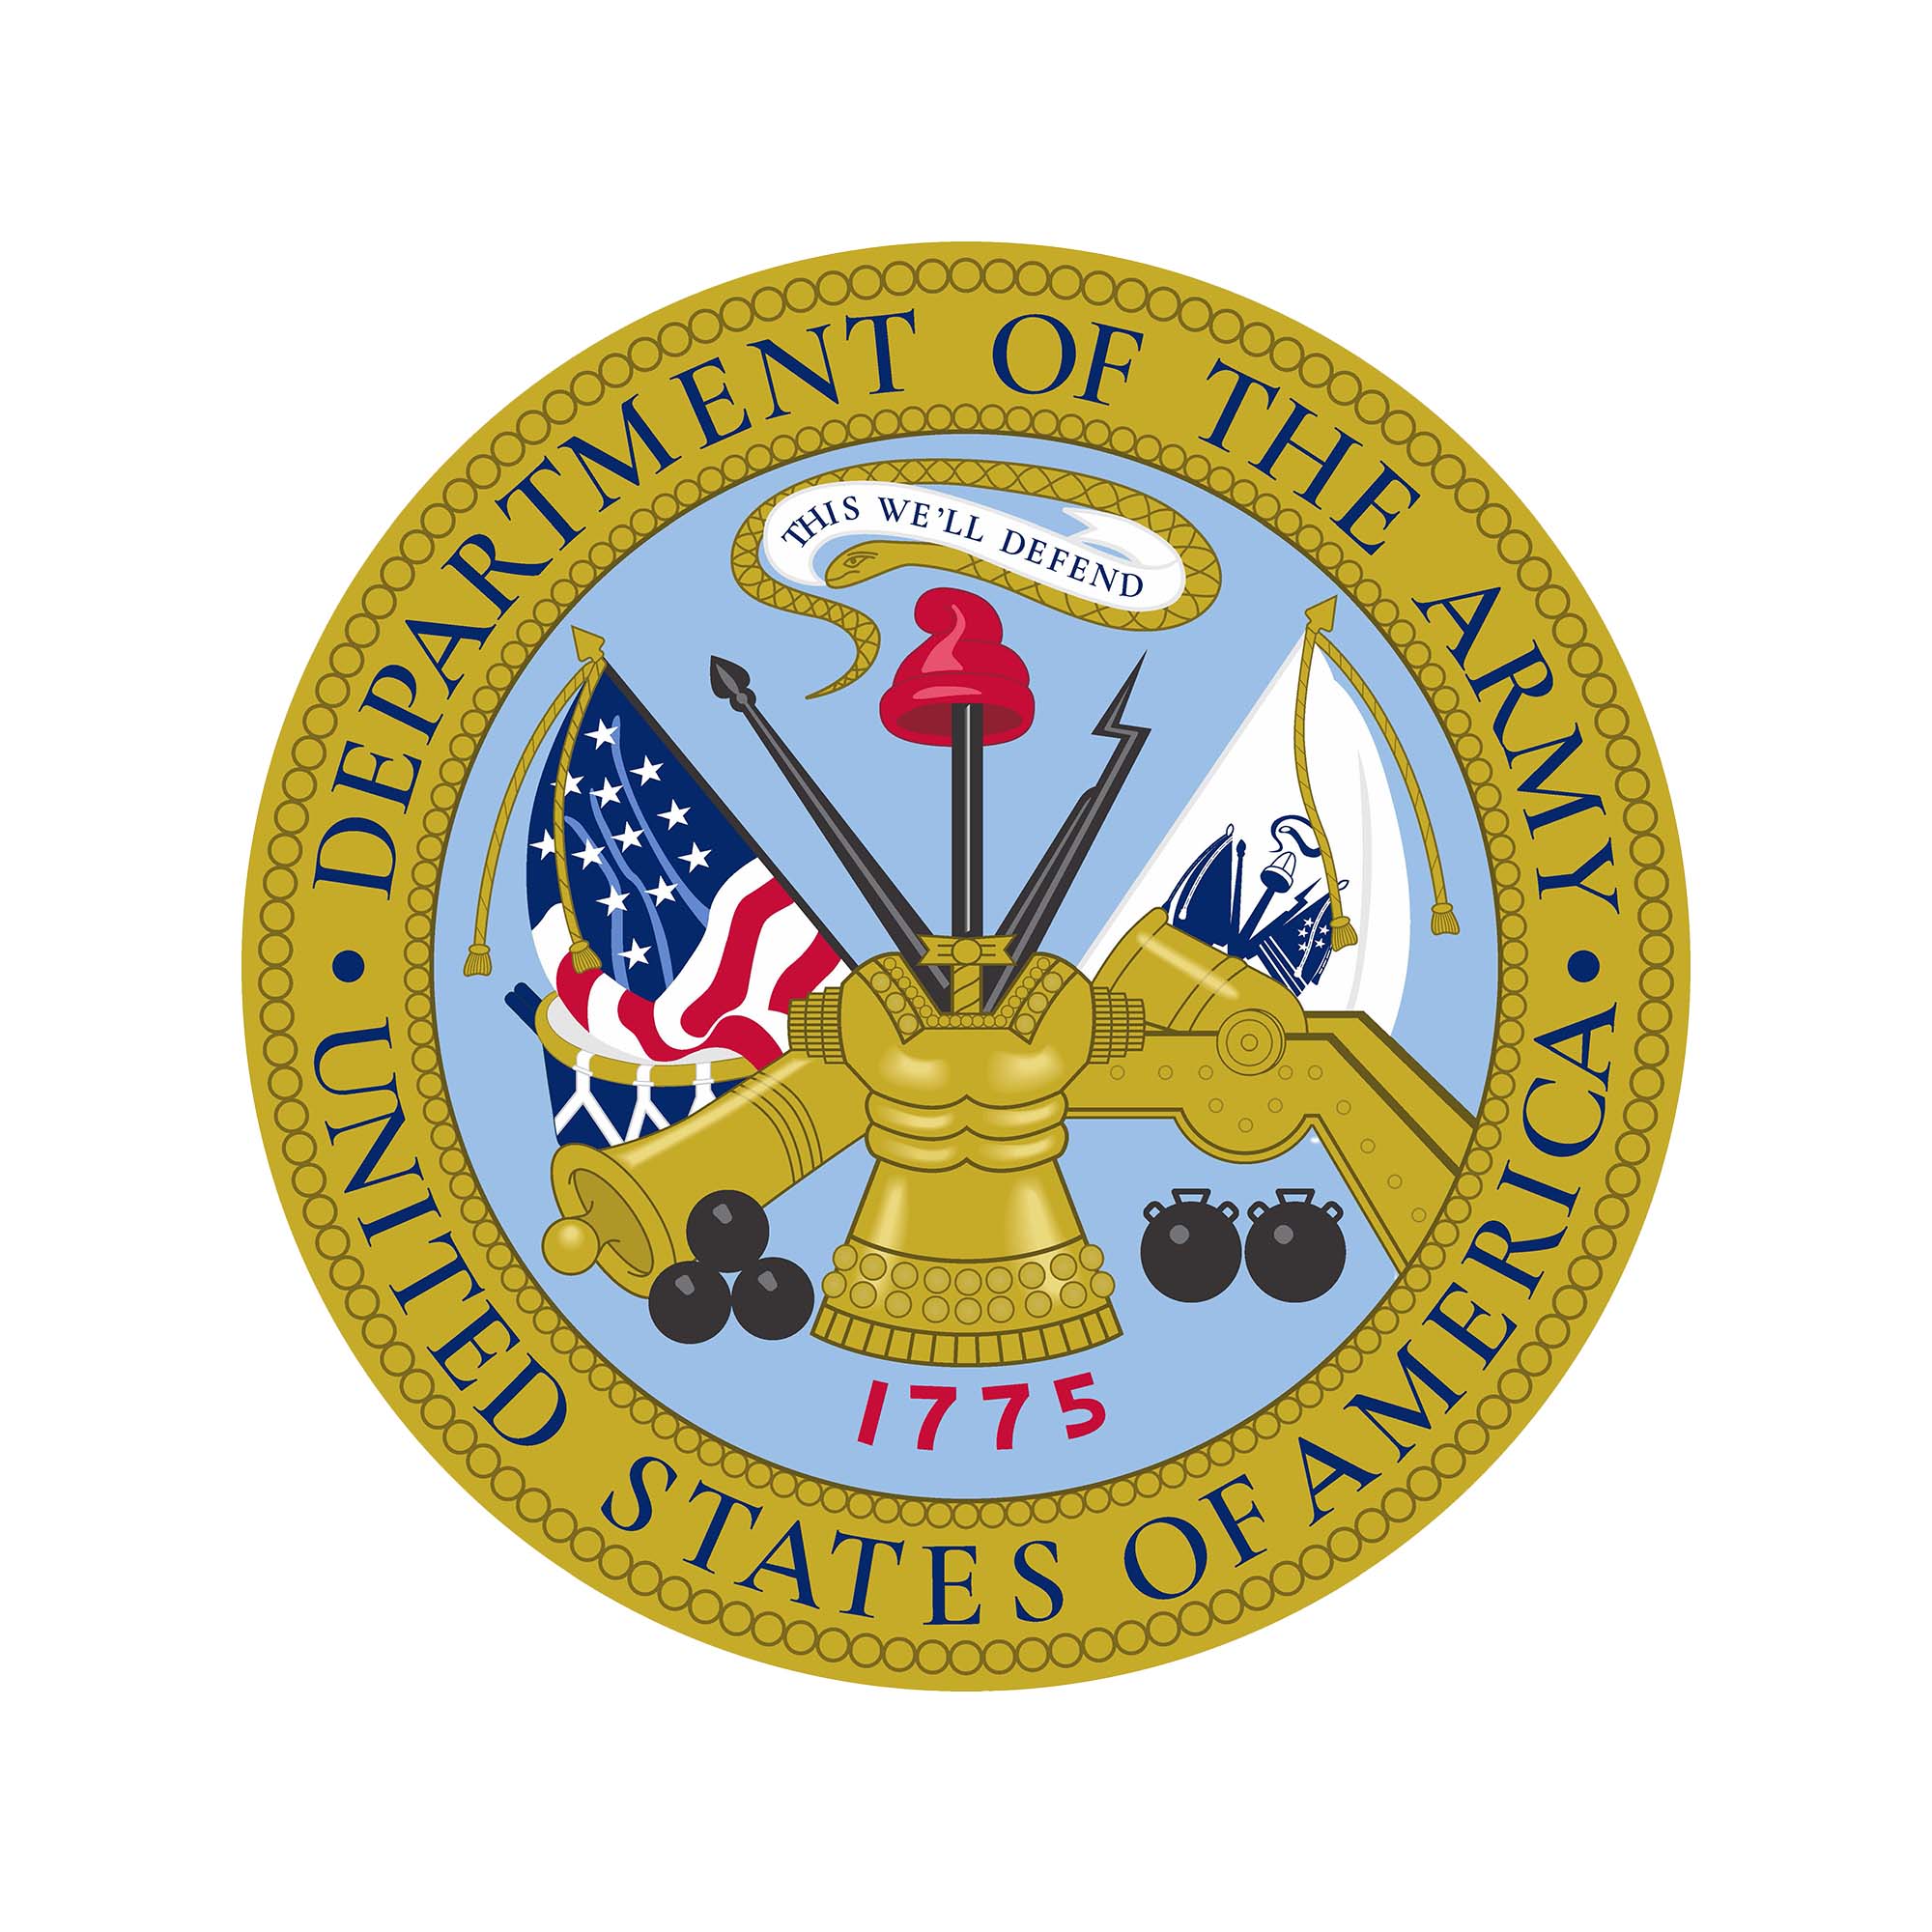 Emblem for the United States Army